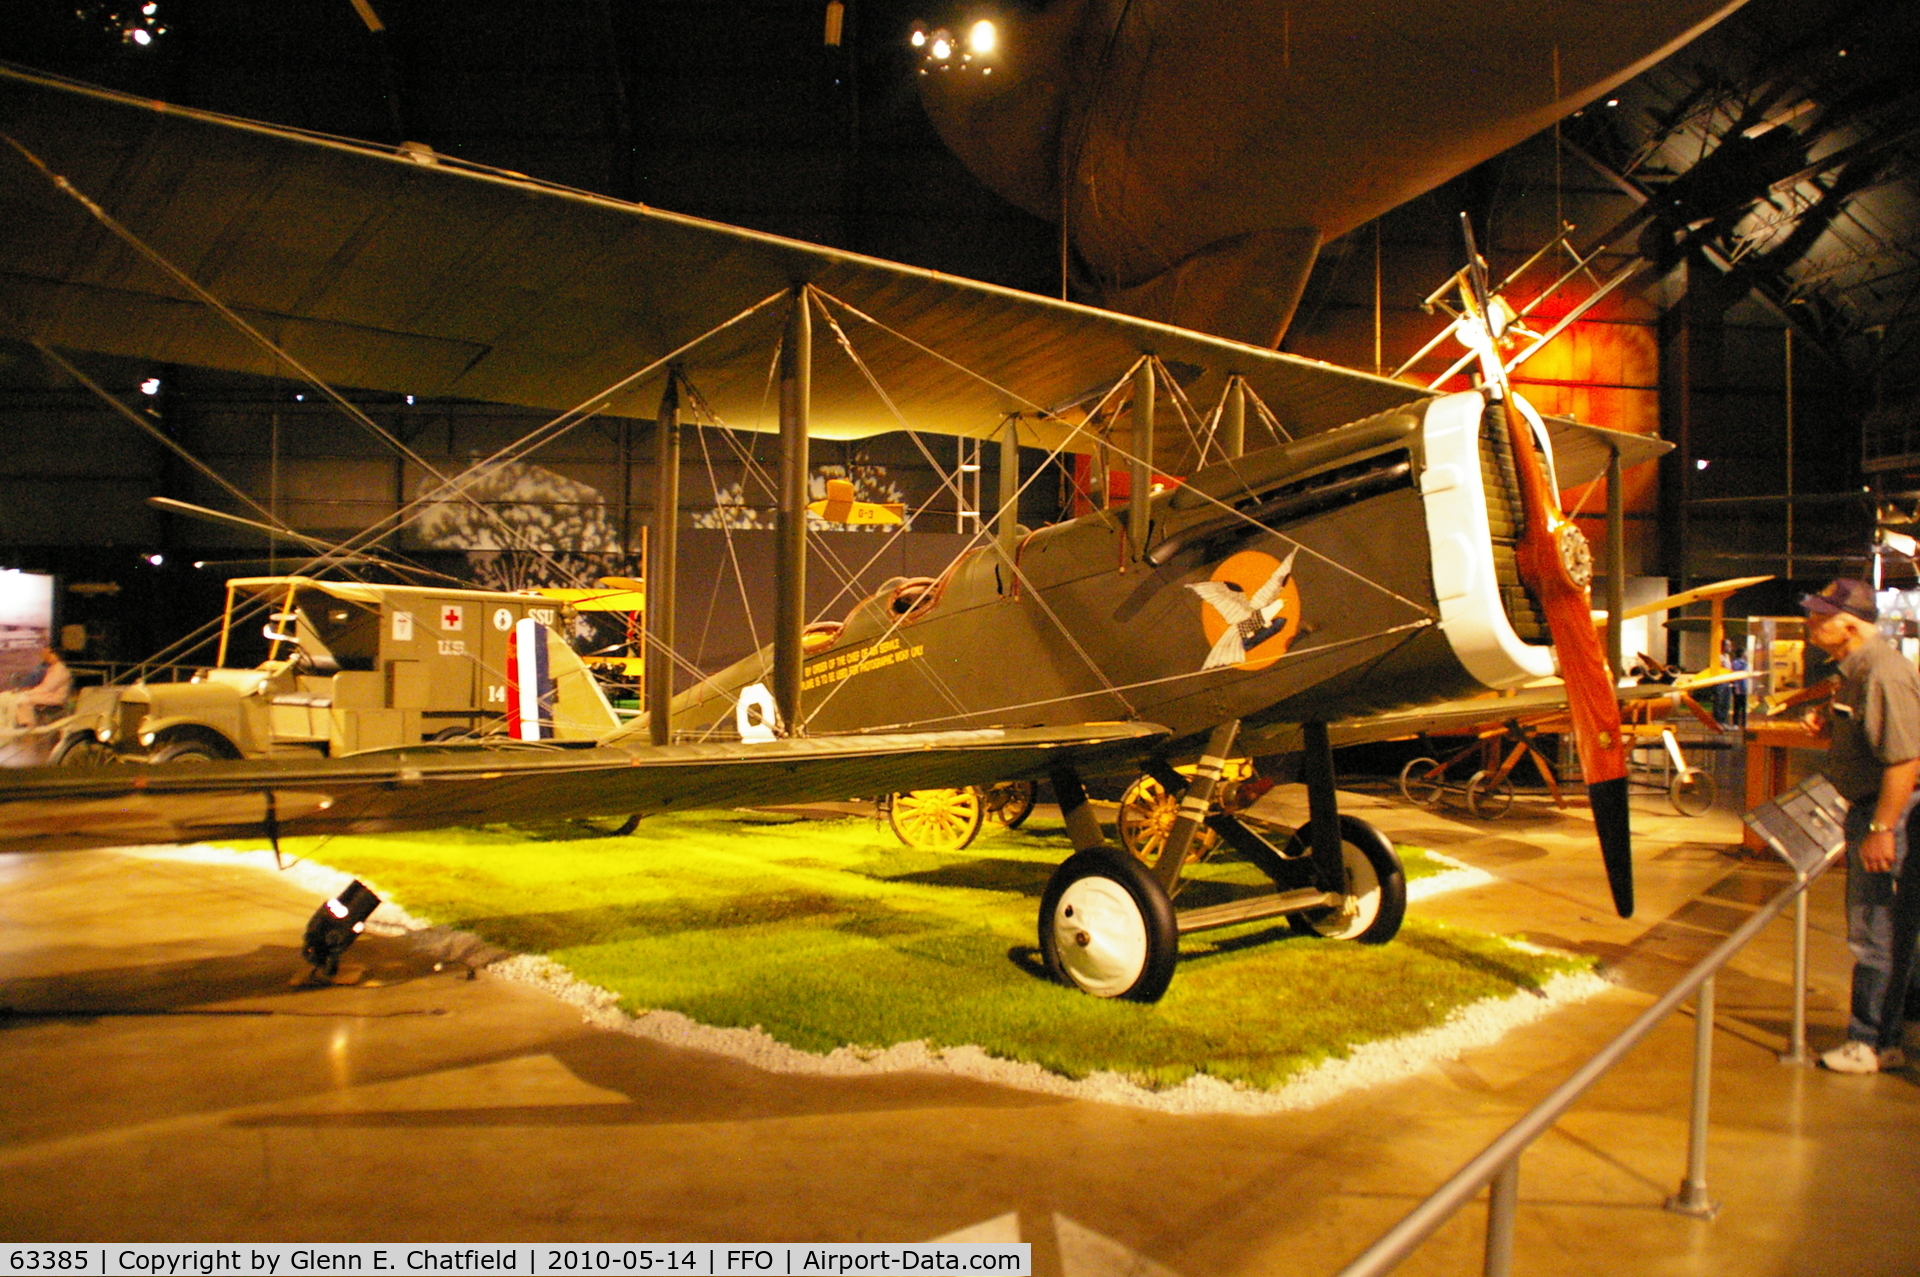 63385, Airco DH4B C/N Not found 63385, DH-4B reproduction at the National Museum of the U.S. Air Force marked as one in 12th Aero Squadron in 1920 